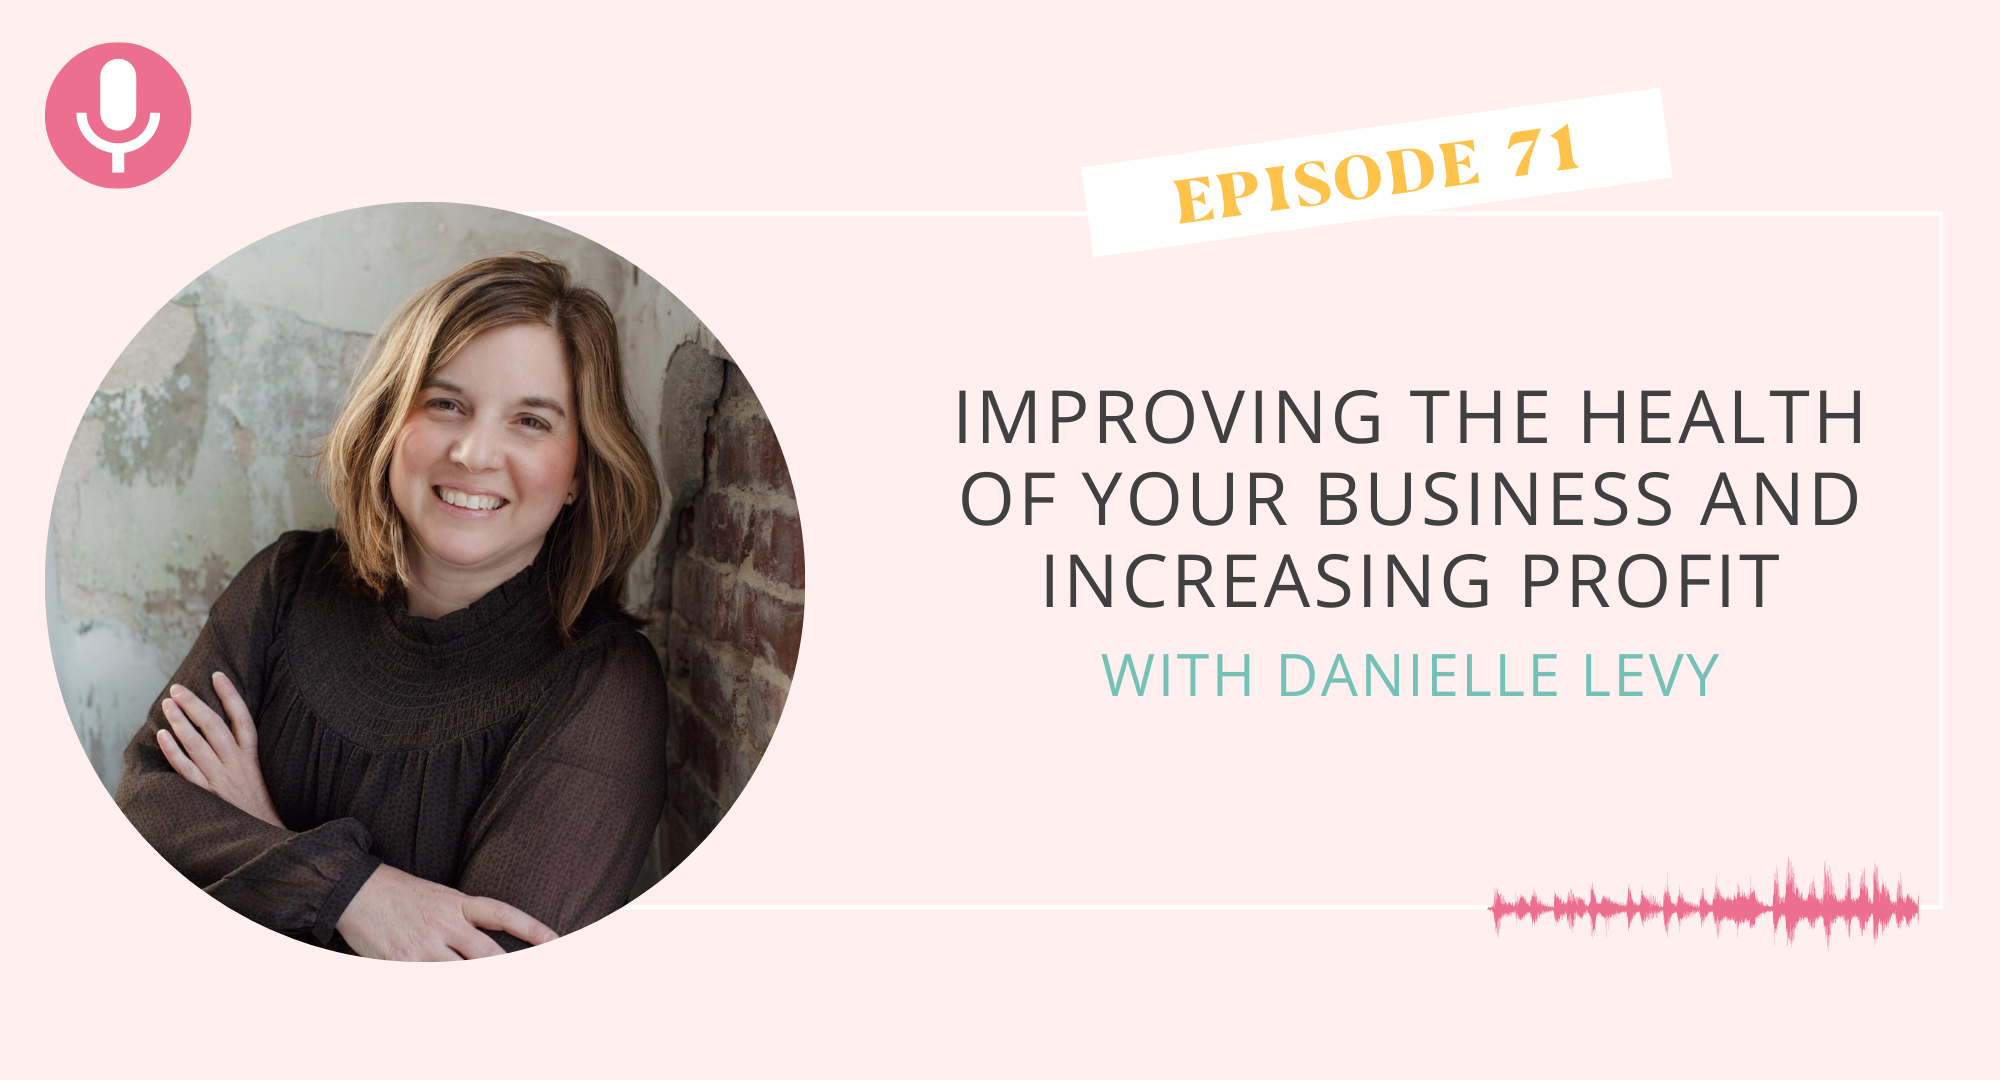 Improving the Health of Your Business and Increasing Profit with Danielle Levy